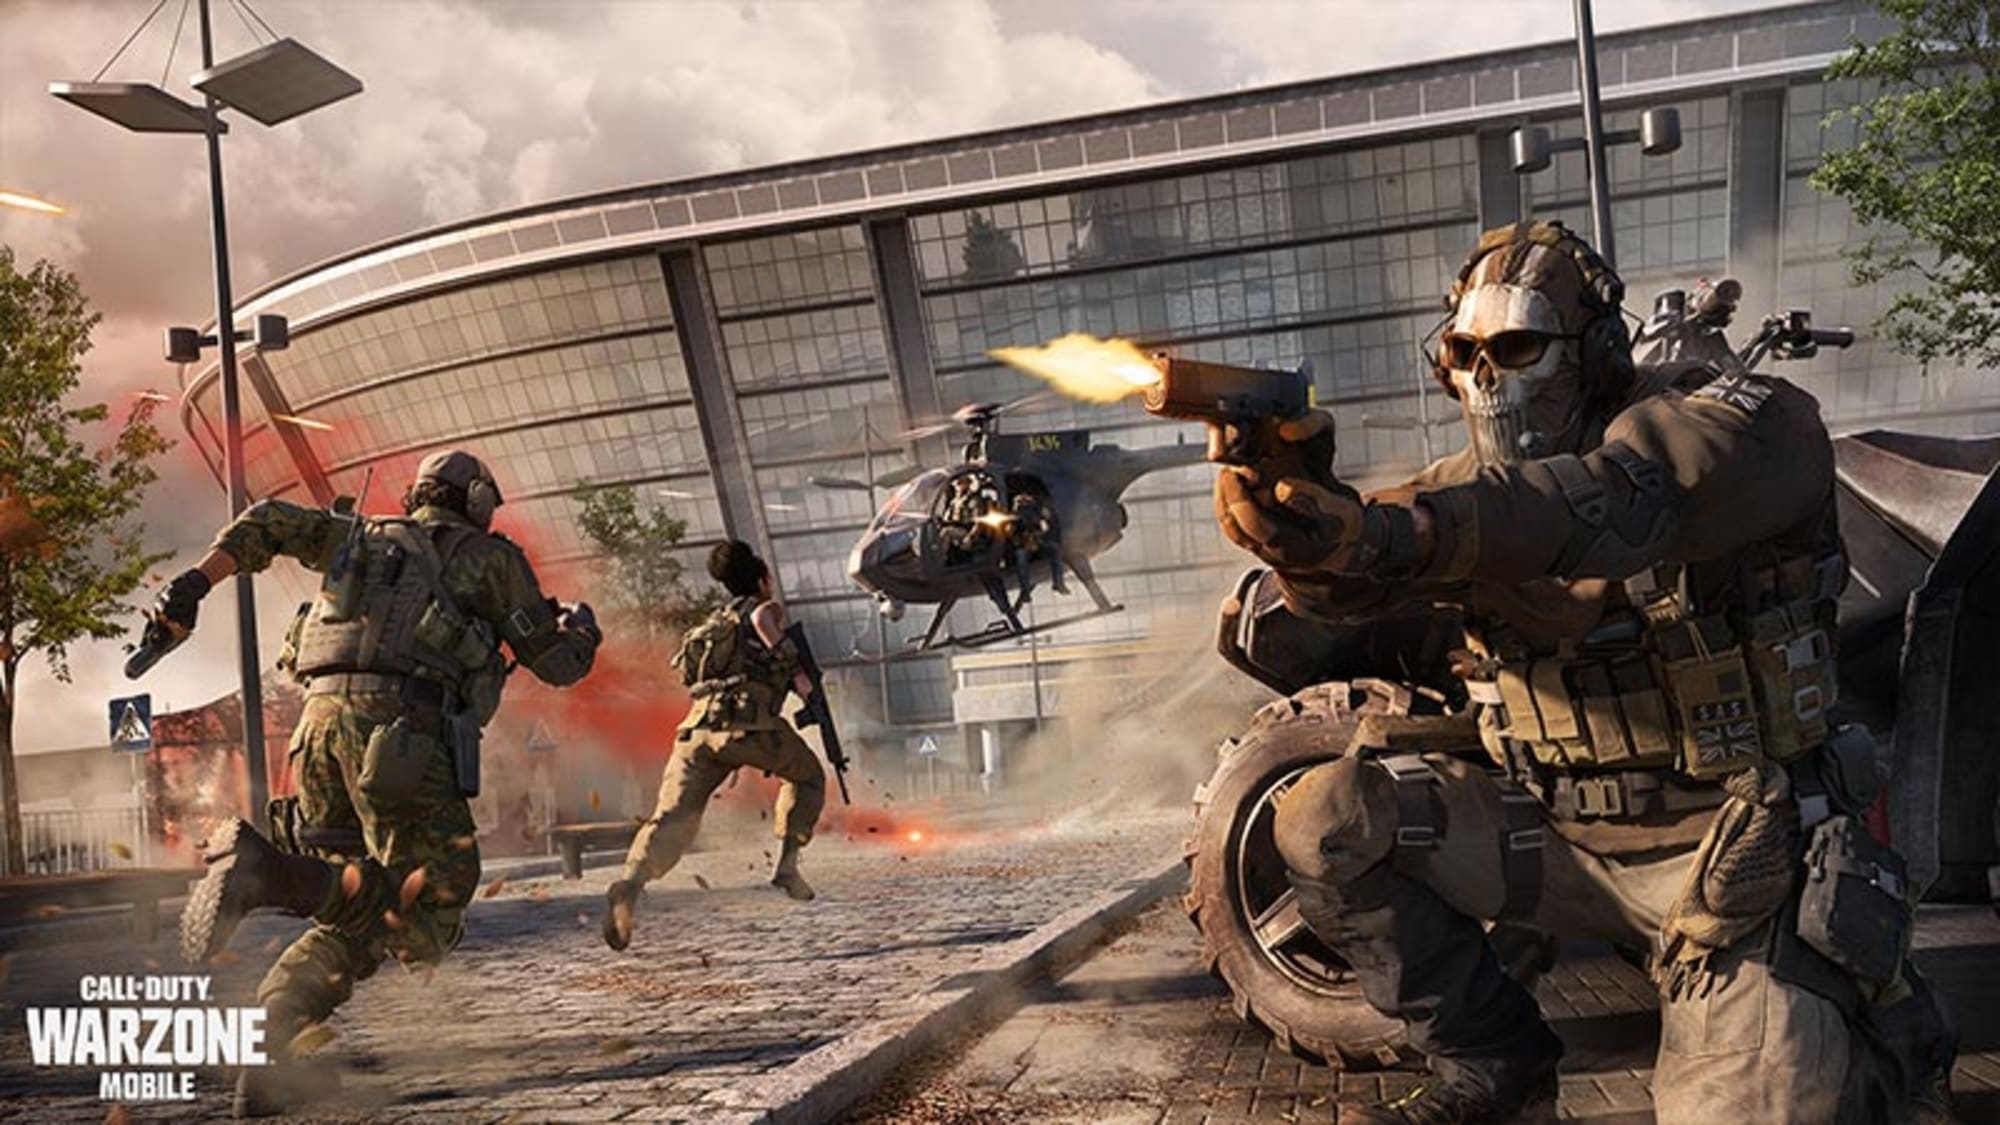 Call of Duty: Mobile Now Available for Android and iOS: How to Download